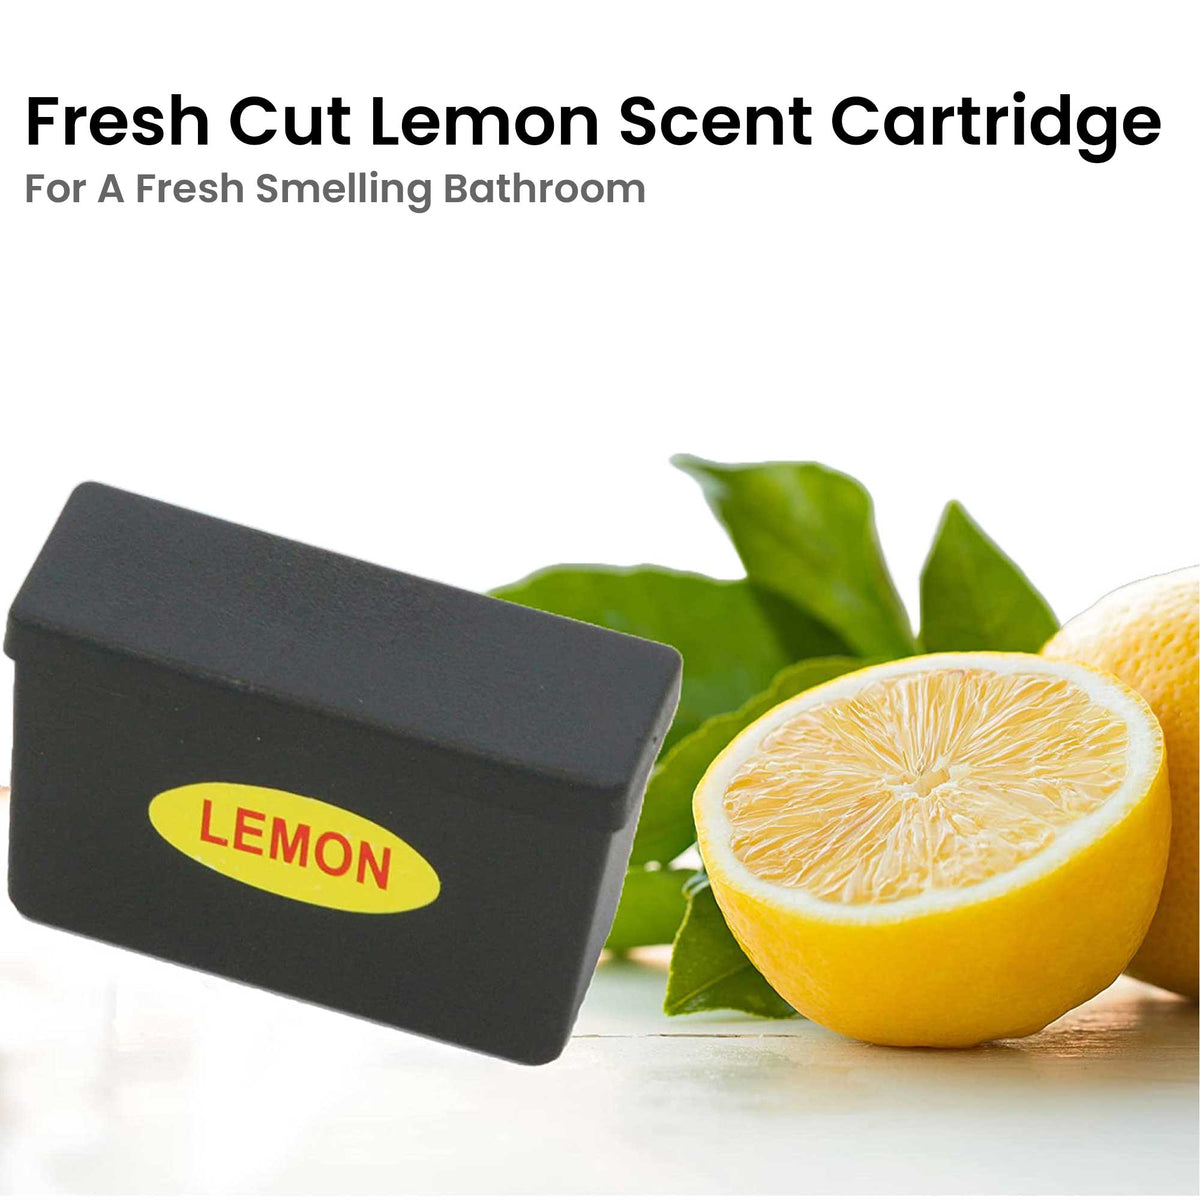 iTouchless Touchless Sensor Kitchen Trash Can and Bathroom Trash Can Combo Pack Fresh Cut Lemon Scent Cartridge